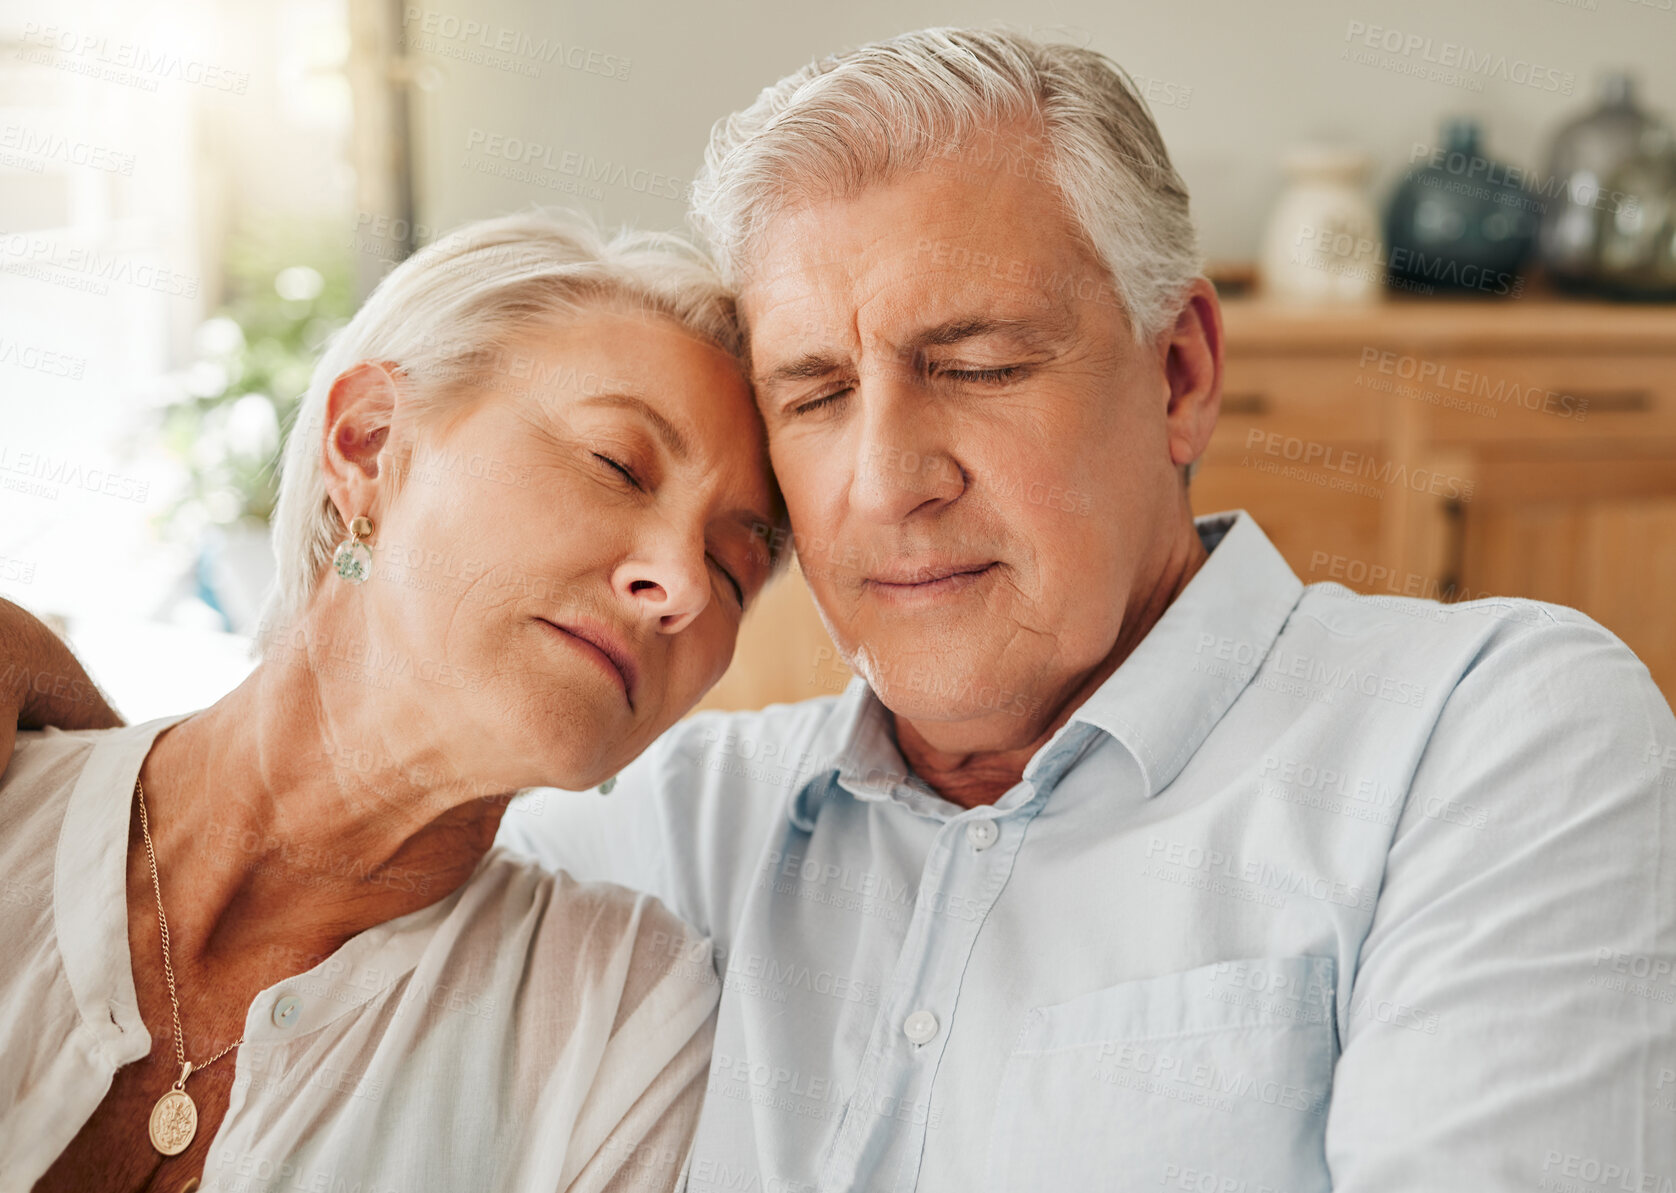 Buy stock photo Sad senior couple with depression over loss in family, depressed and upset with life problem. Mental health, anxiety and grief for elderly man and woman in emotional pain together in home living room